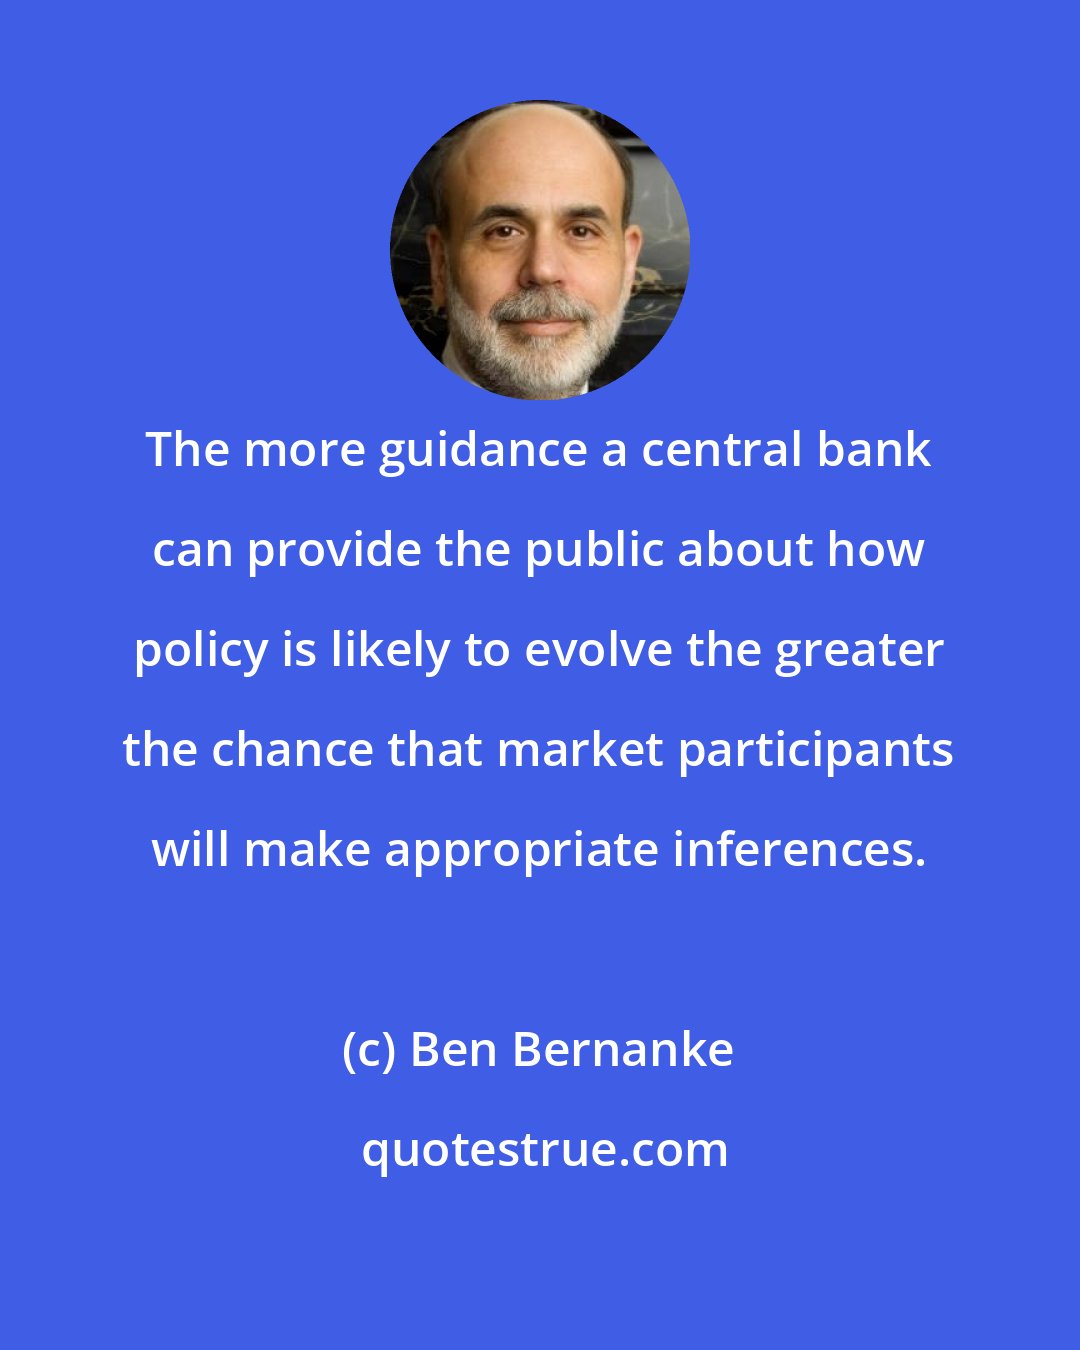 Ben Bernanke: The more guidance a central bank can provide the public about how policy is likely to evolve the greater the chance that market participants will make appropriate inferences.